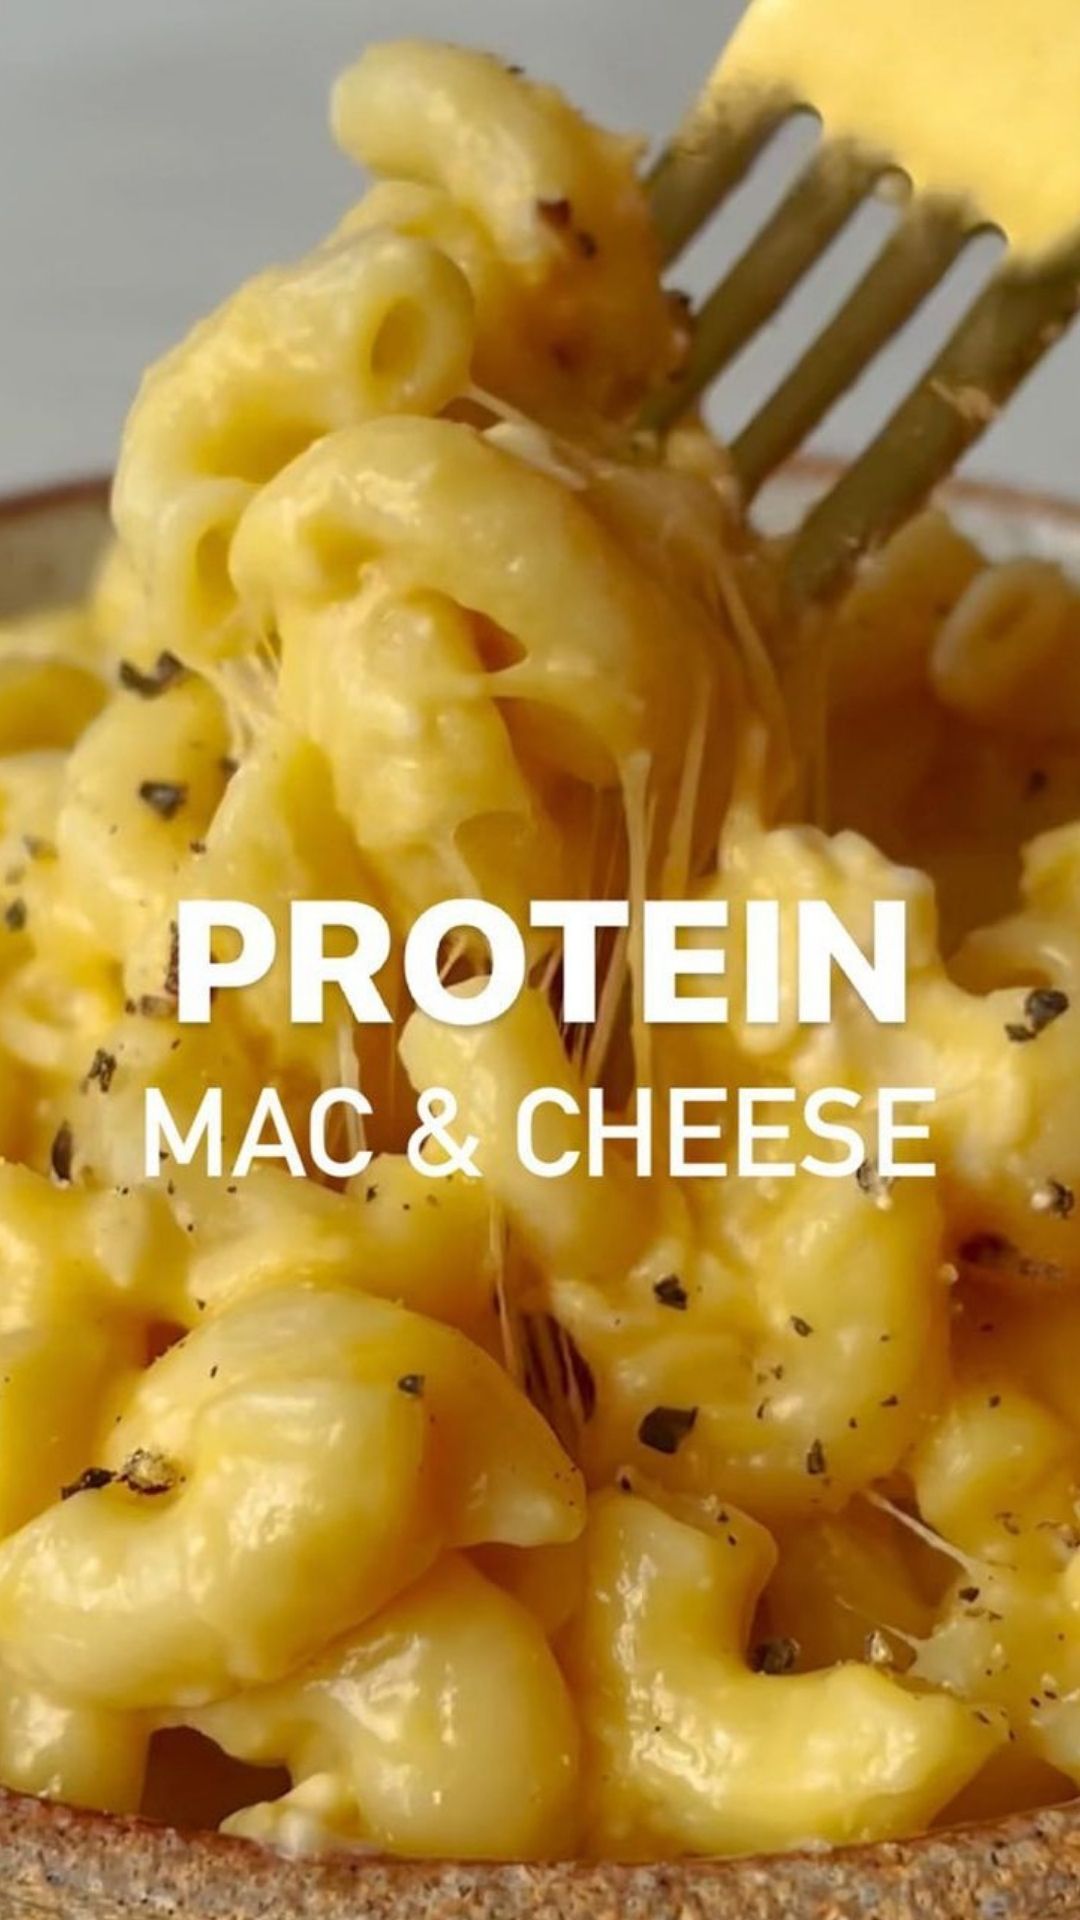 macaroni and cheese instant pot recipe